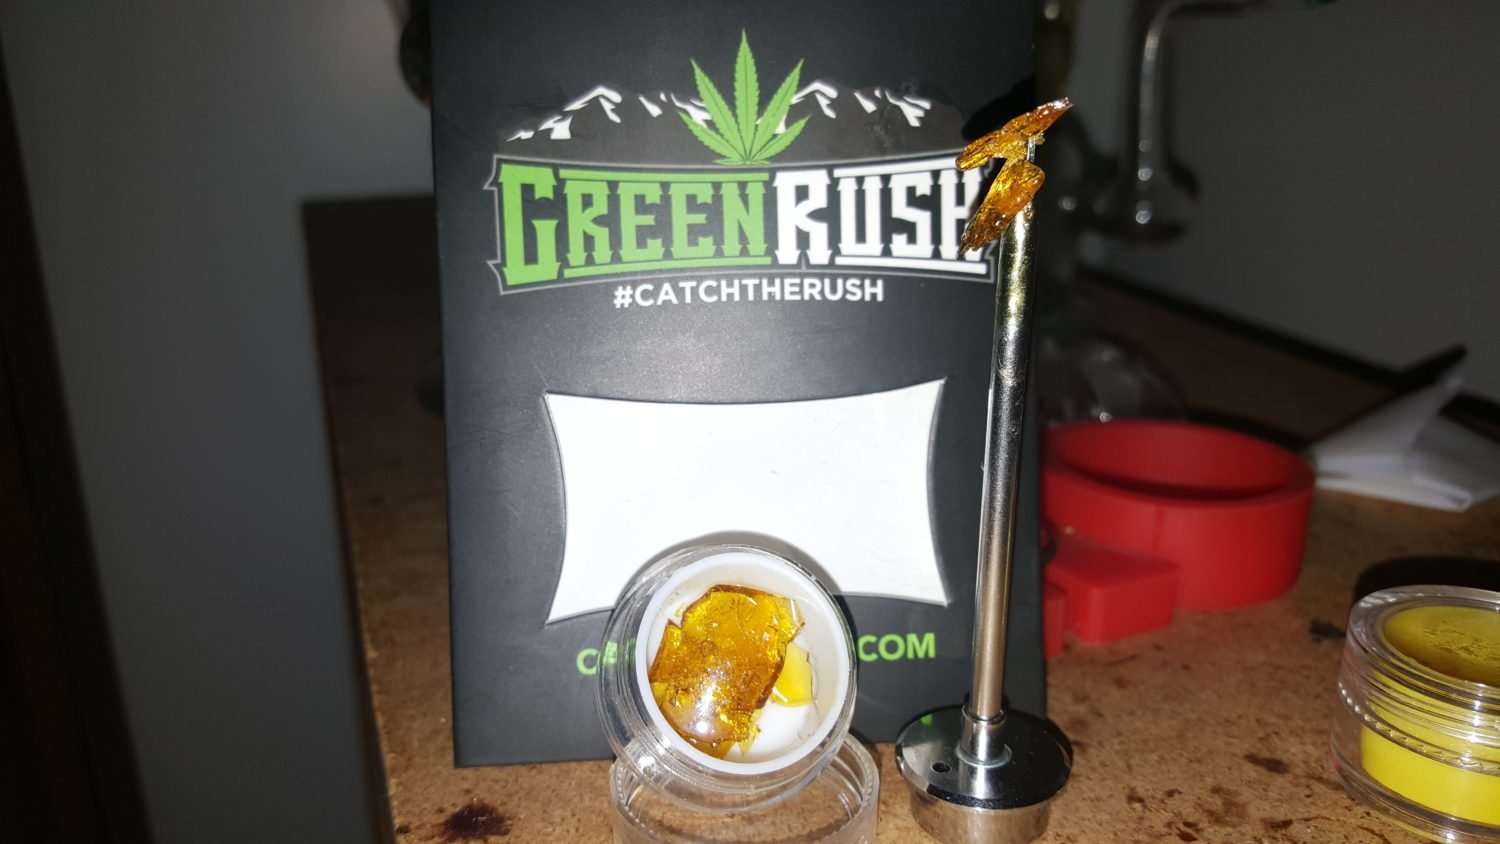 A Review Of GreenRush’s Royal Locktite Shatter